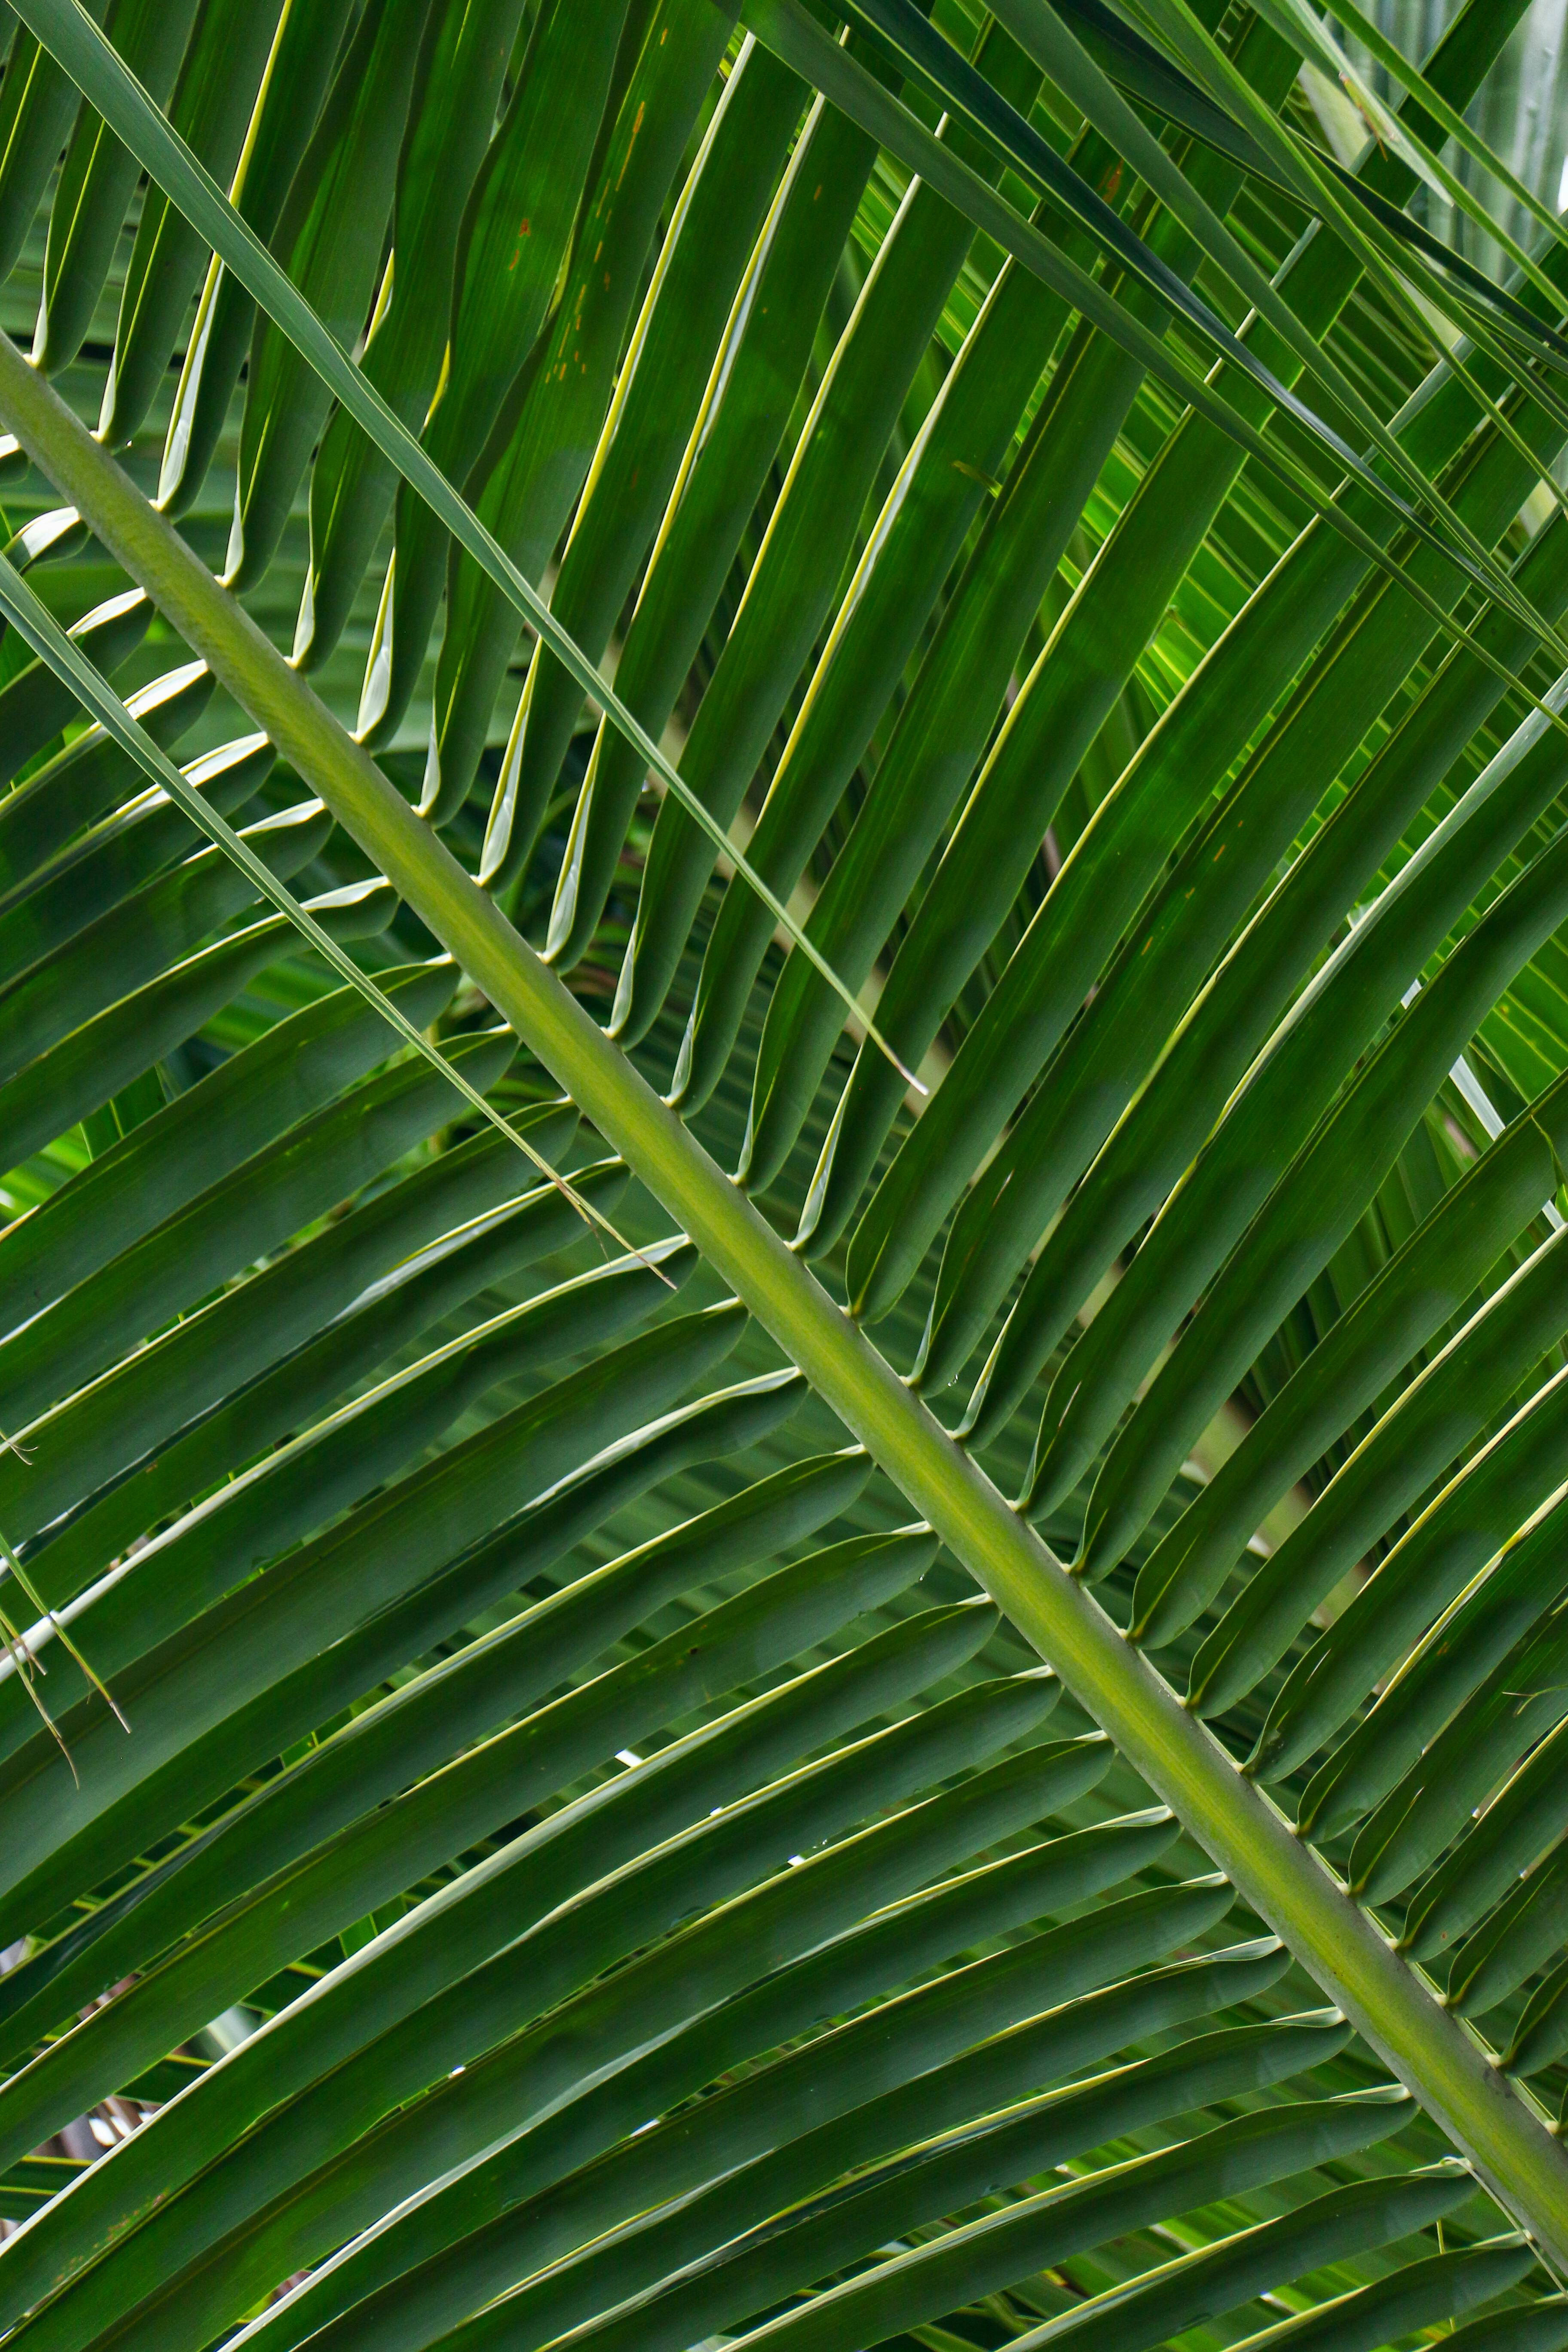 The Sago Palm Plant in Close-up Shot · Free Stock Photo